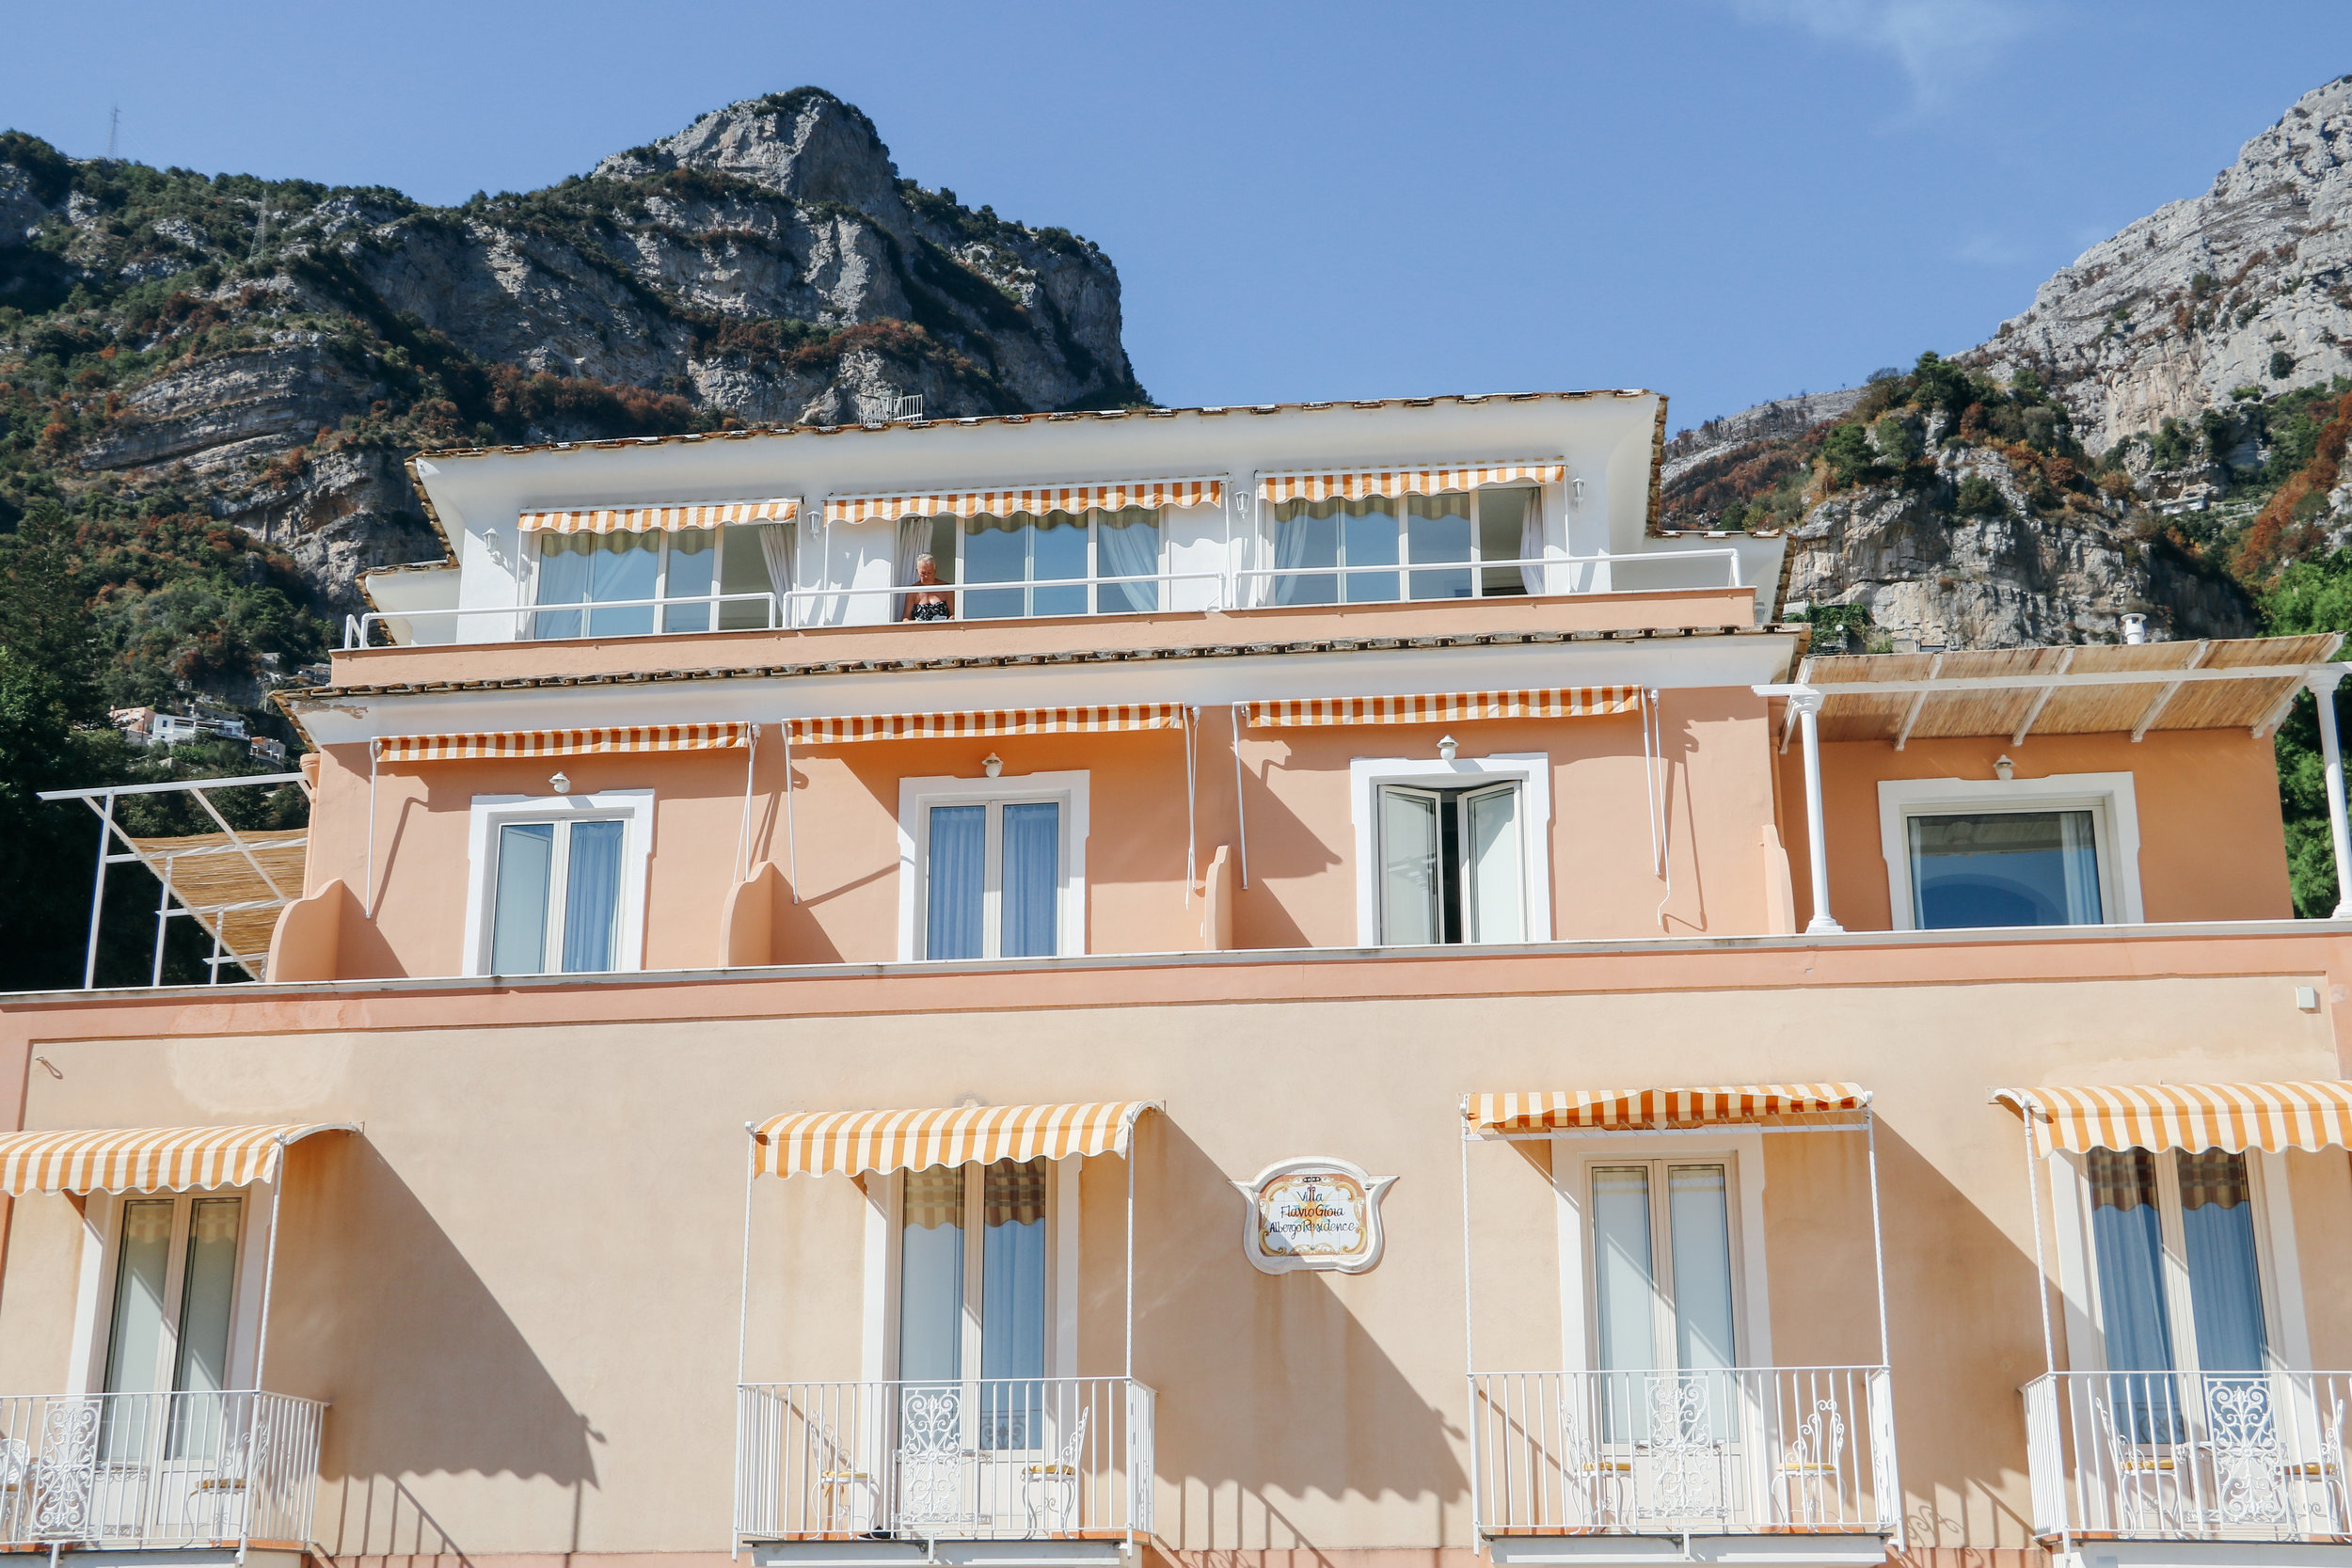 The Chic Traveler's Guide to Positano